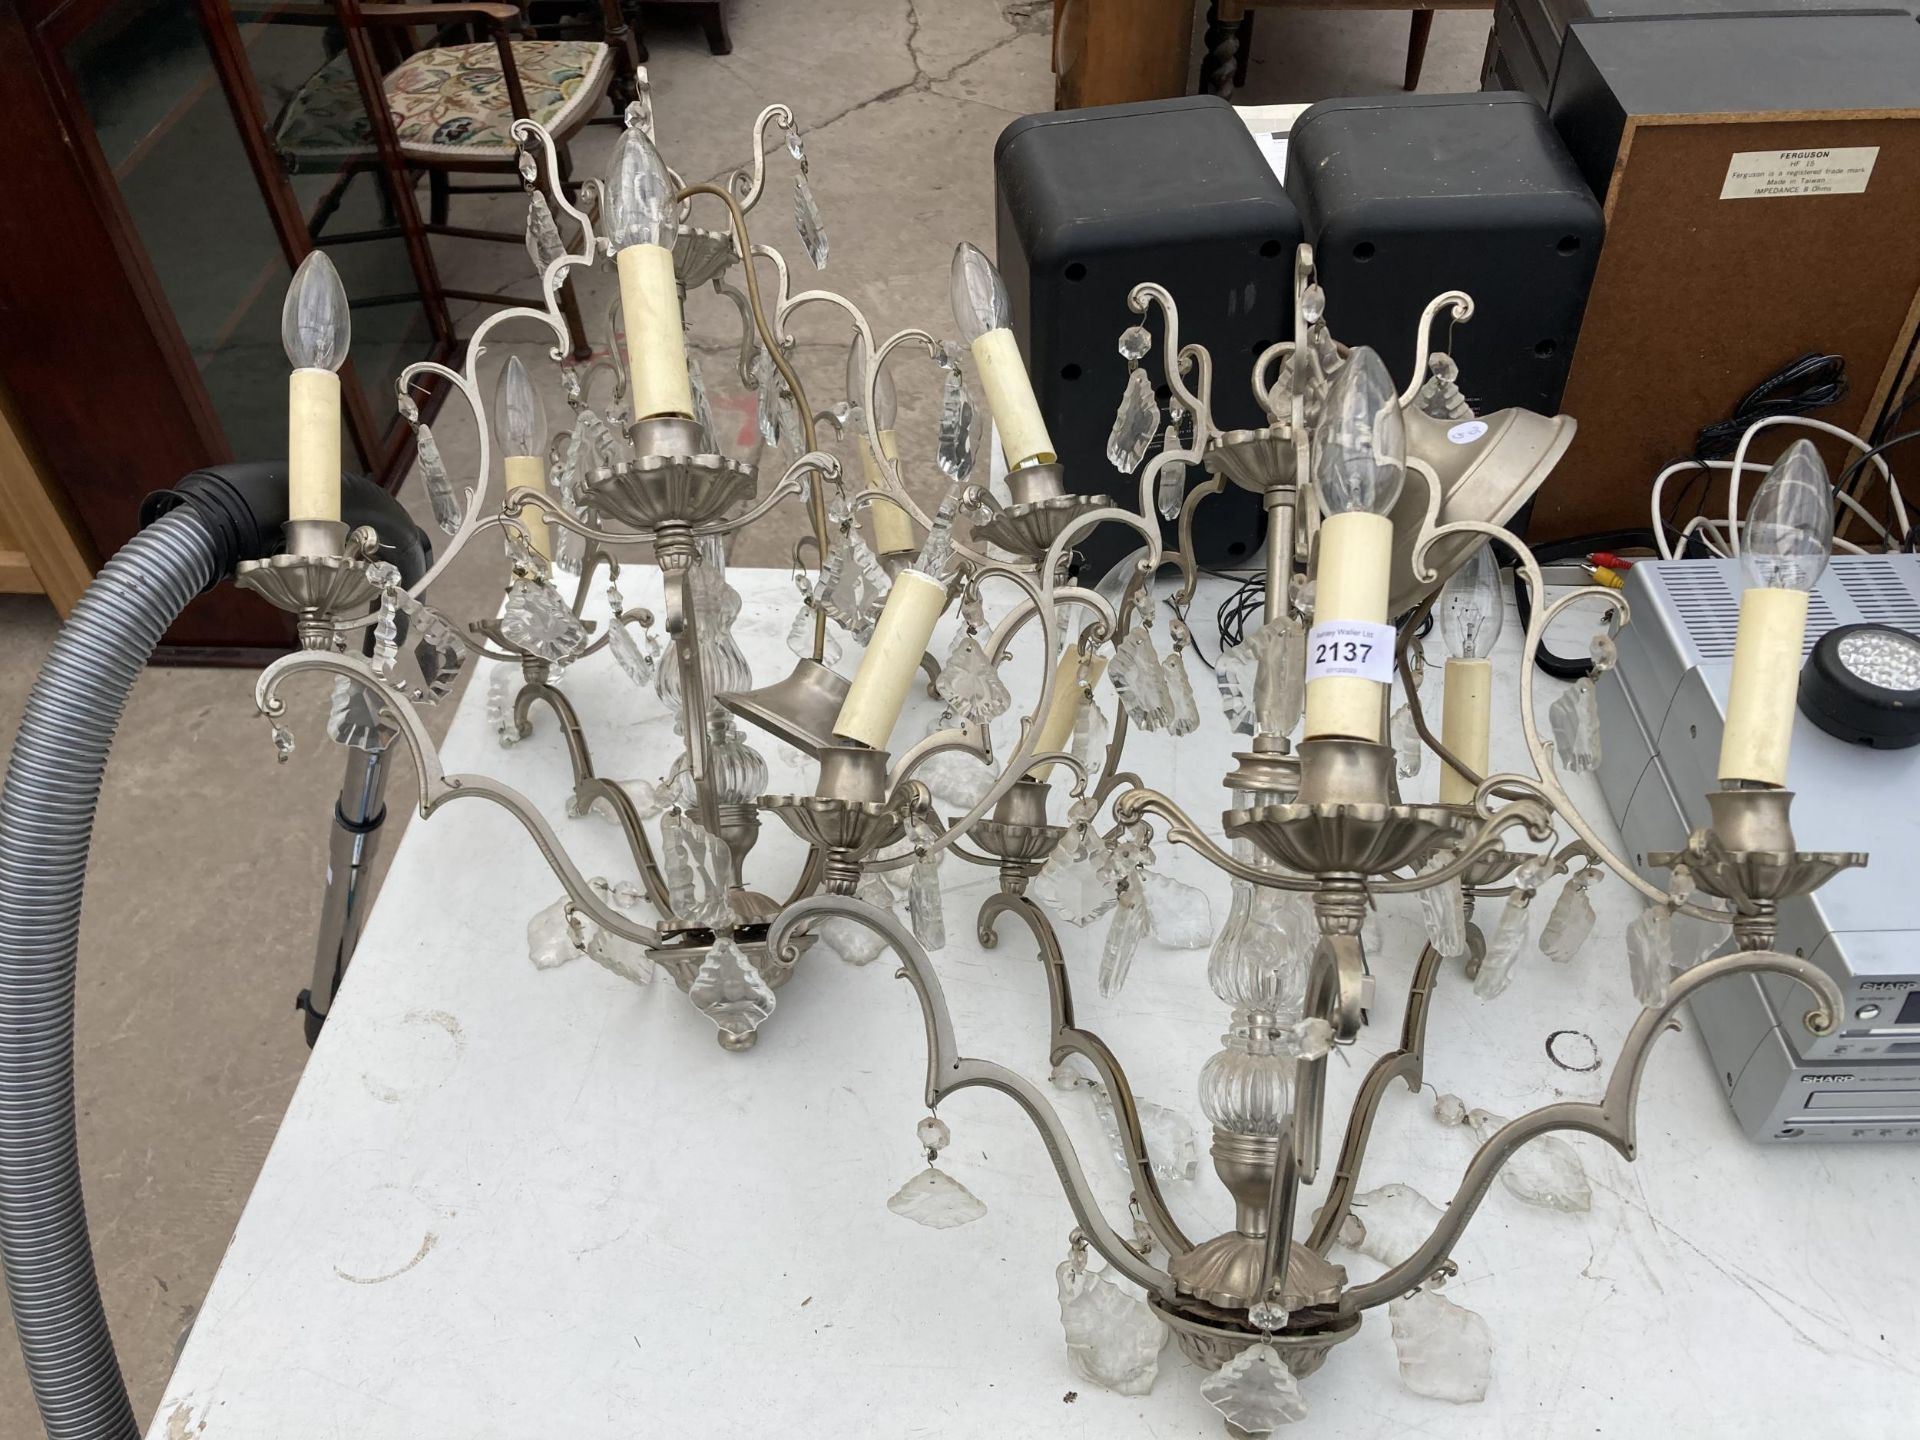 A PAIR OF FIVE BRANCH CEILING LIGHT FITTINGS